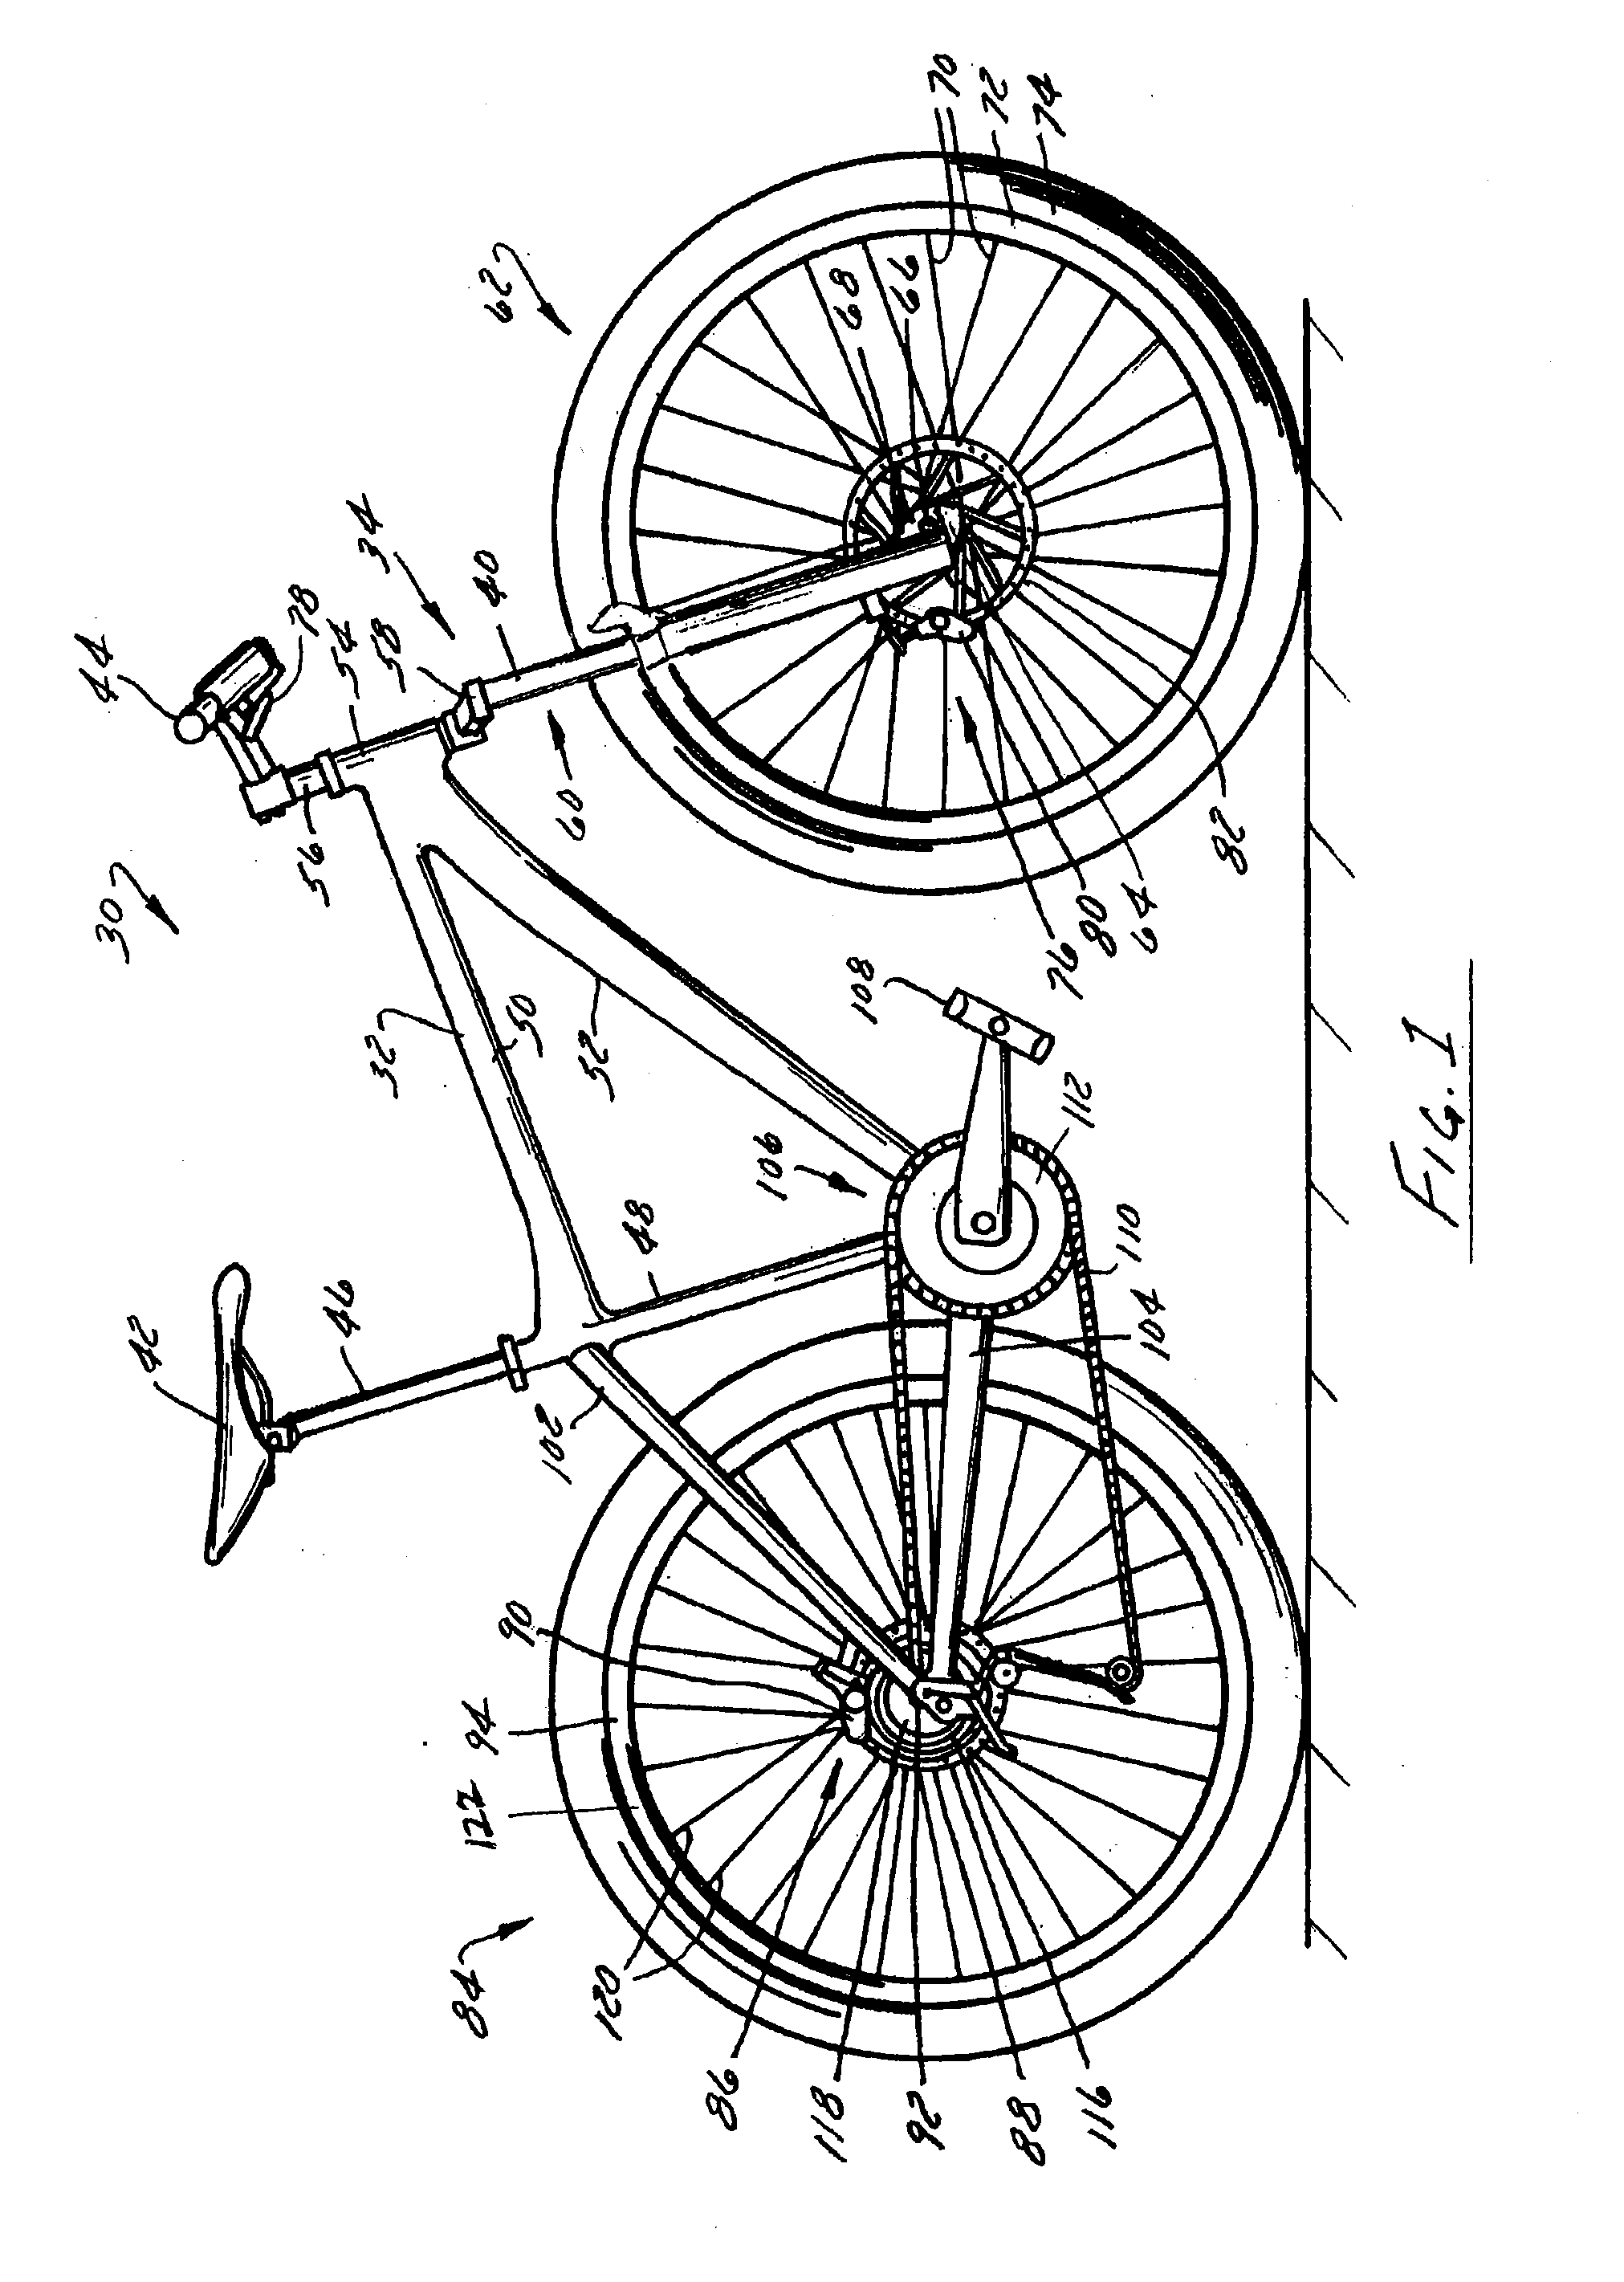 Bicycle Air Shock Assemblies With Tunable Suspension Performance